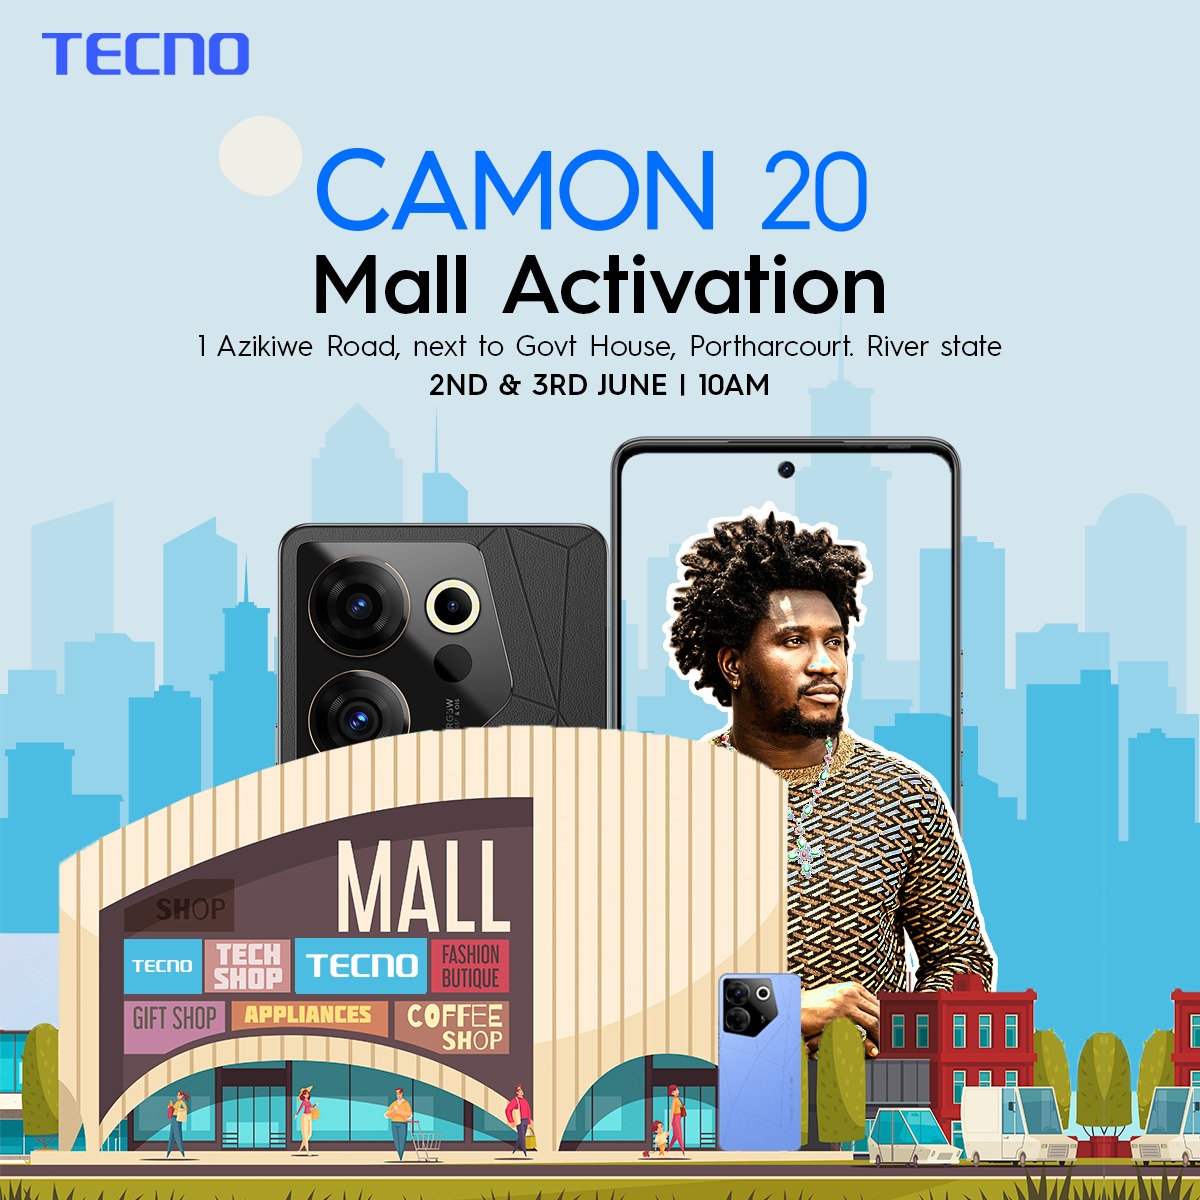 Look who's coming to spice things up @iamnasboi

Come spend time with him and experience the CAMON 20 for a chance to get amazing gift items. 

#TECNOForNigerian
#CAMON20Series